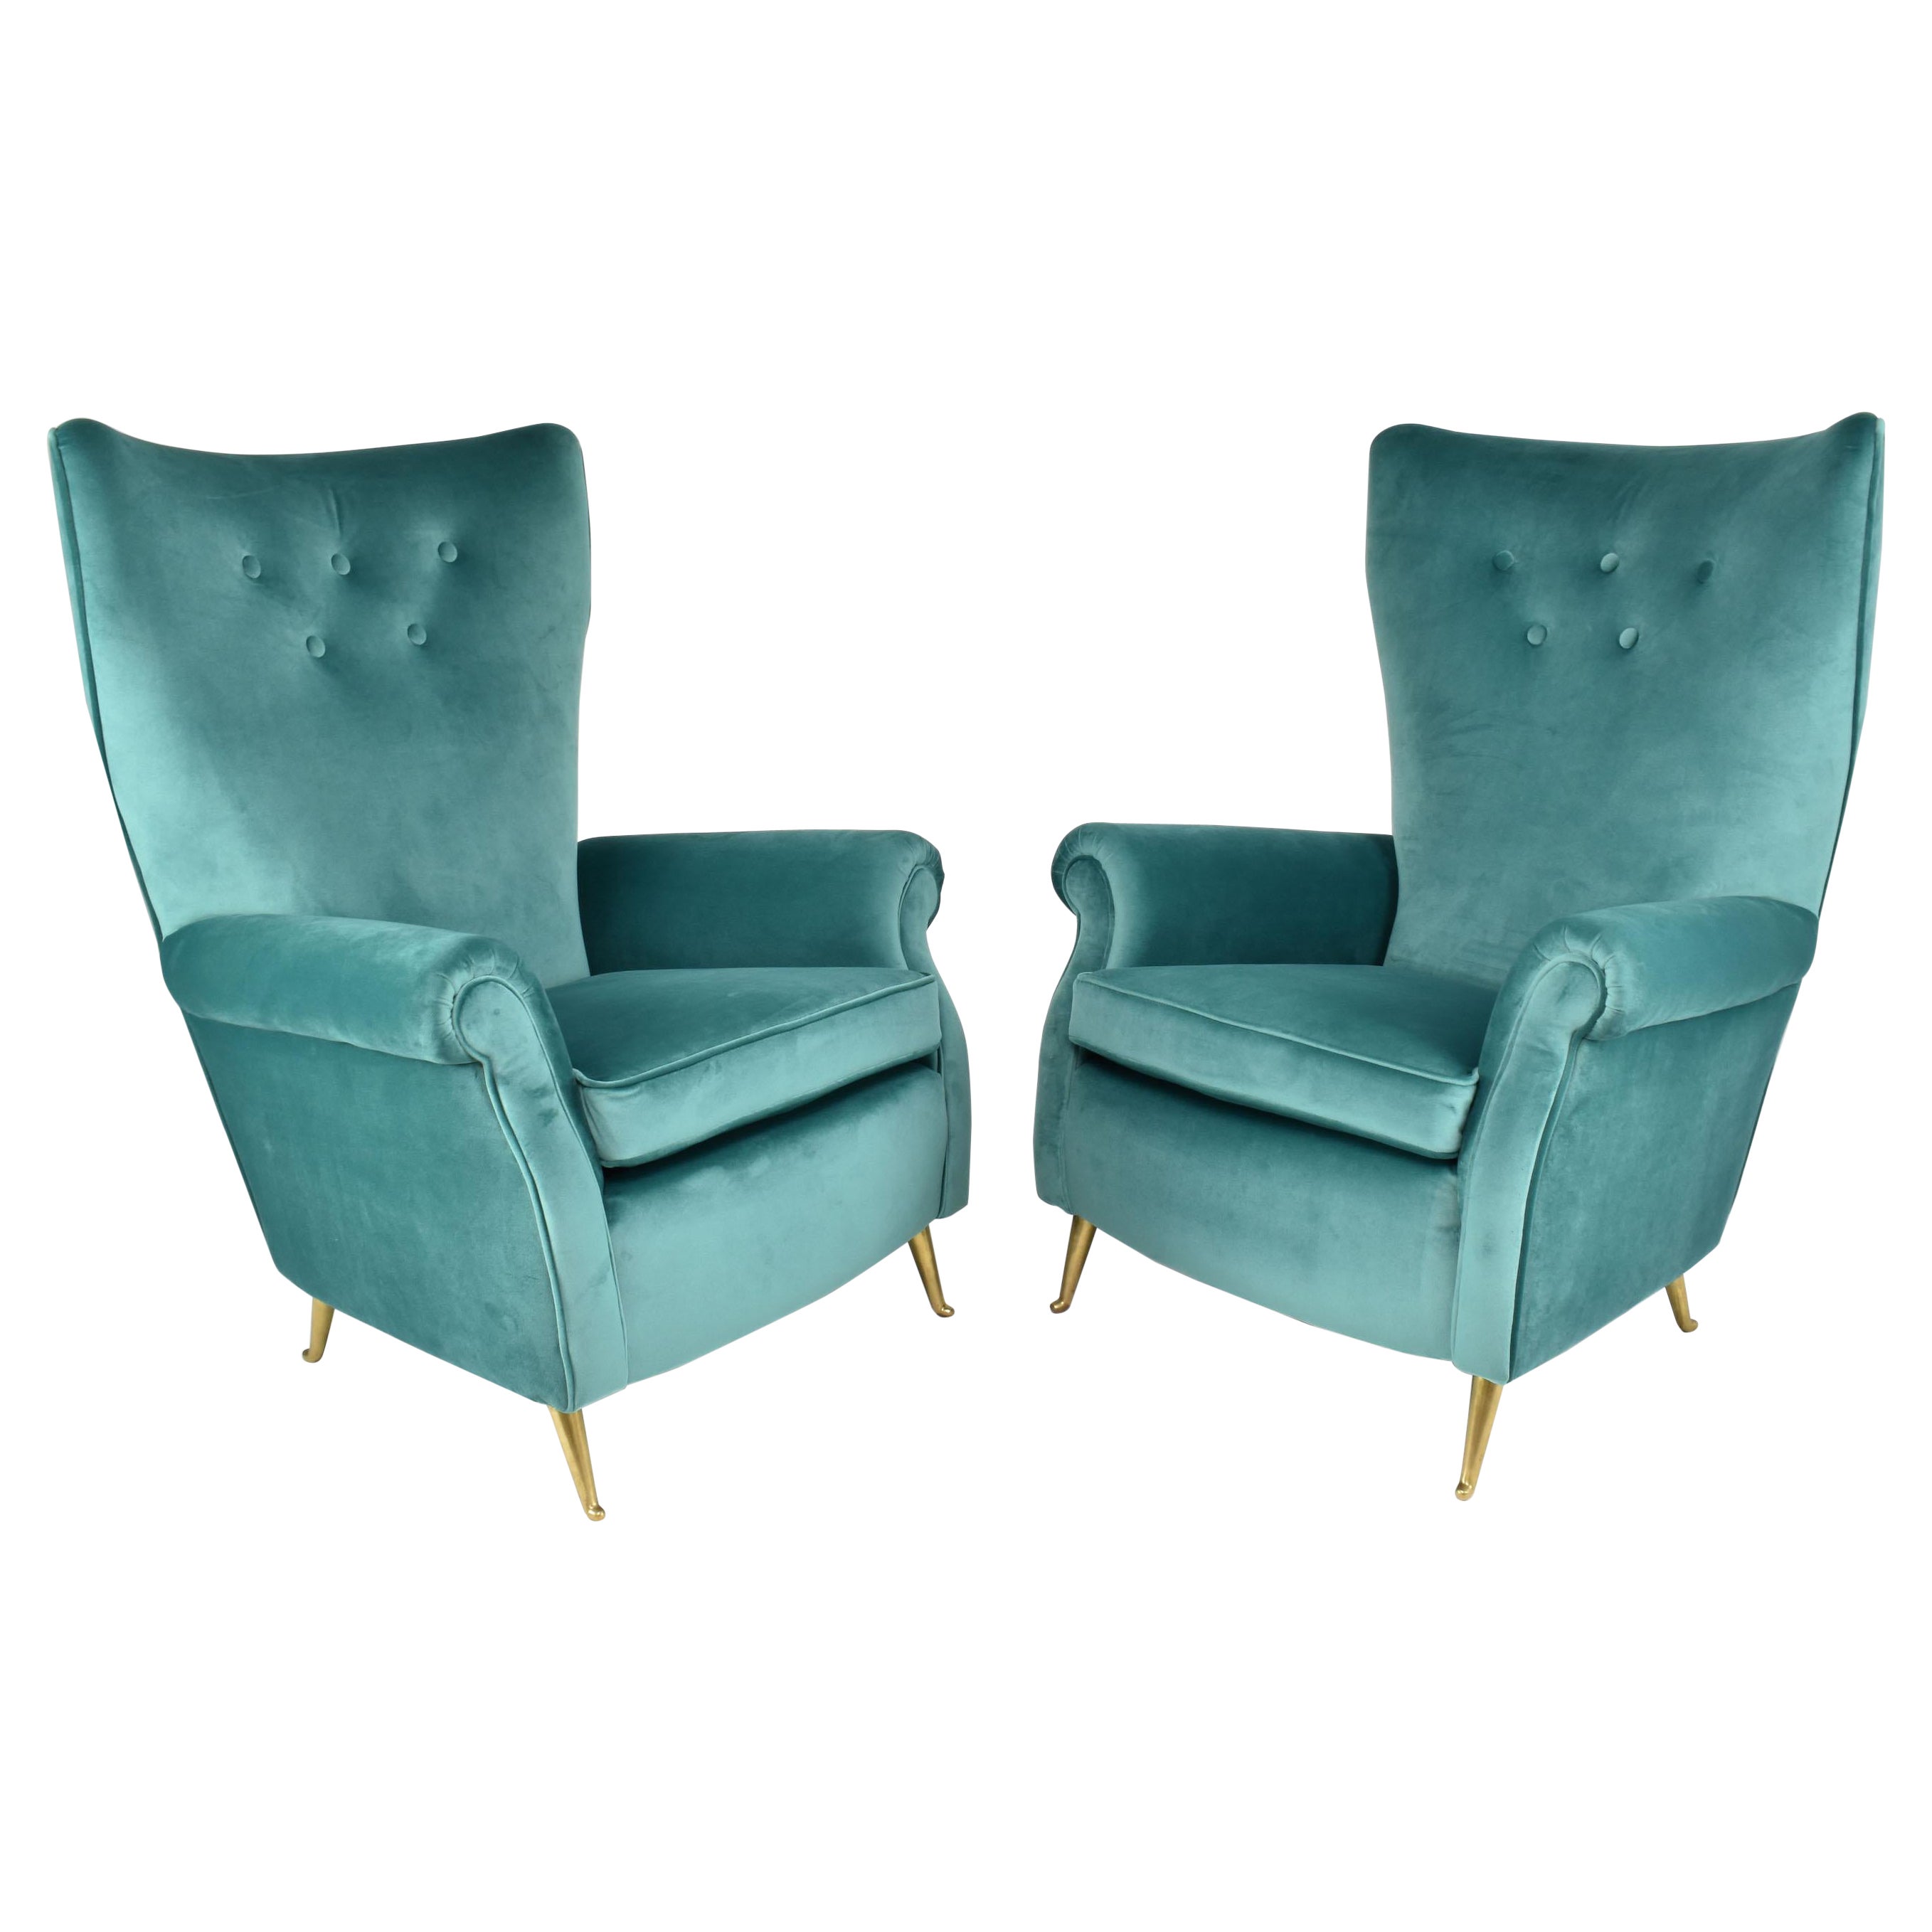 Italian Midcentury Armchairs by ISA Bergamo, Set of Two, 1950s For Sale